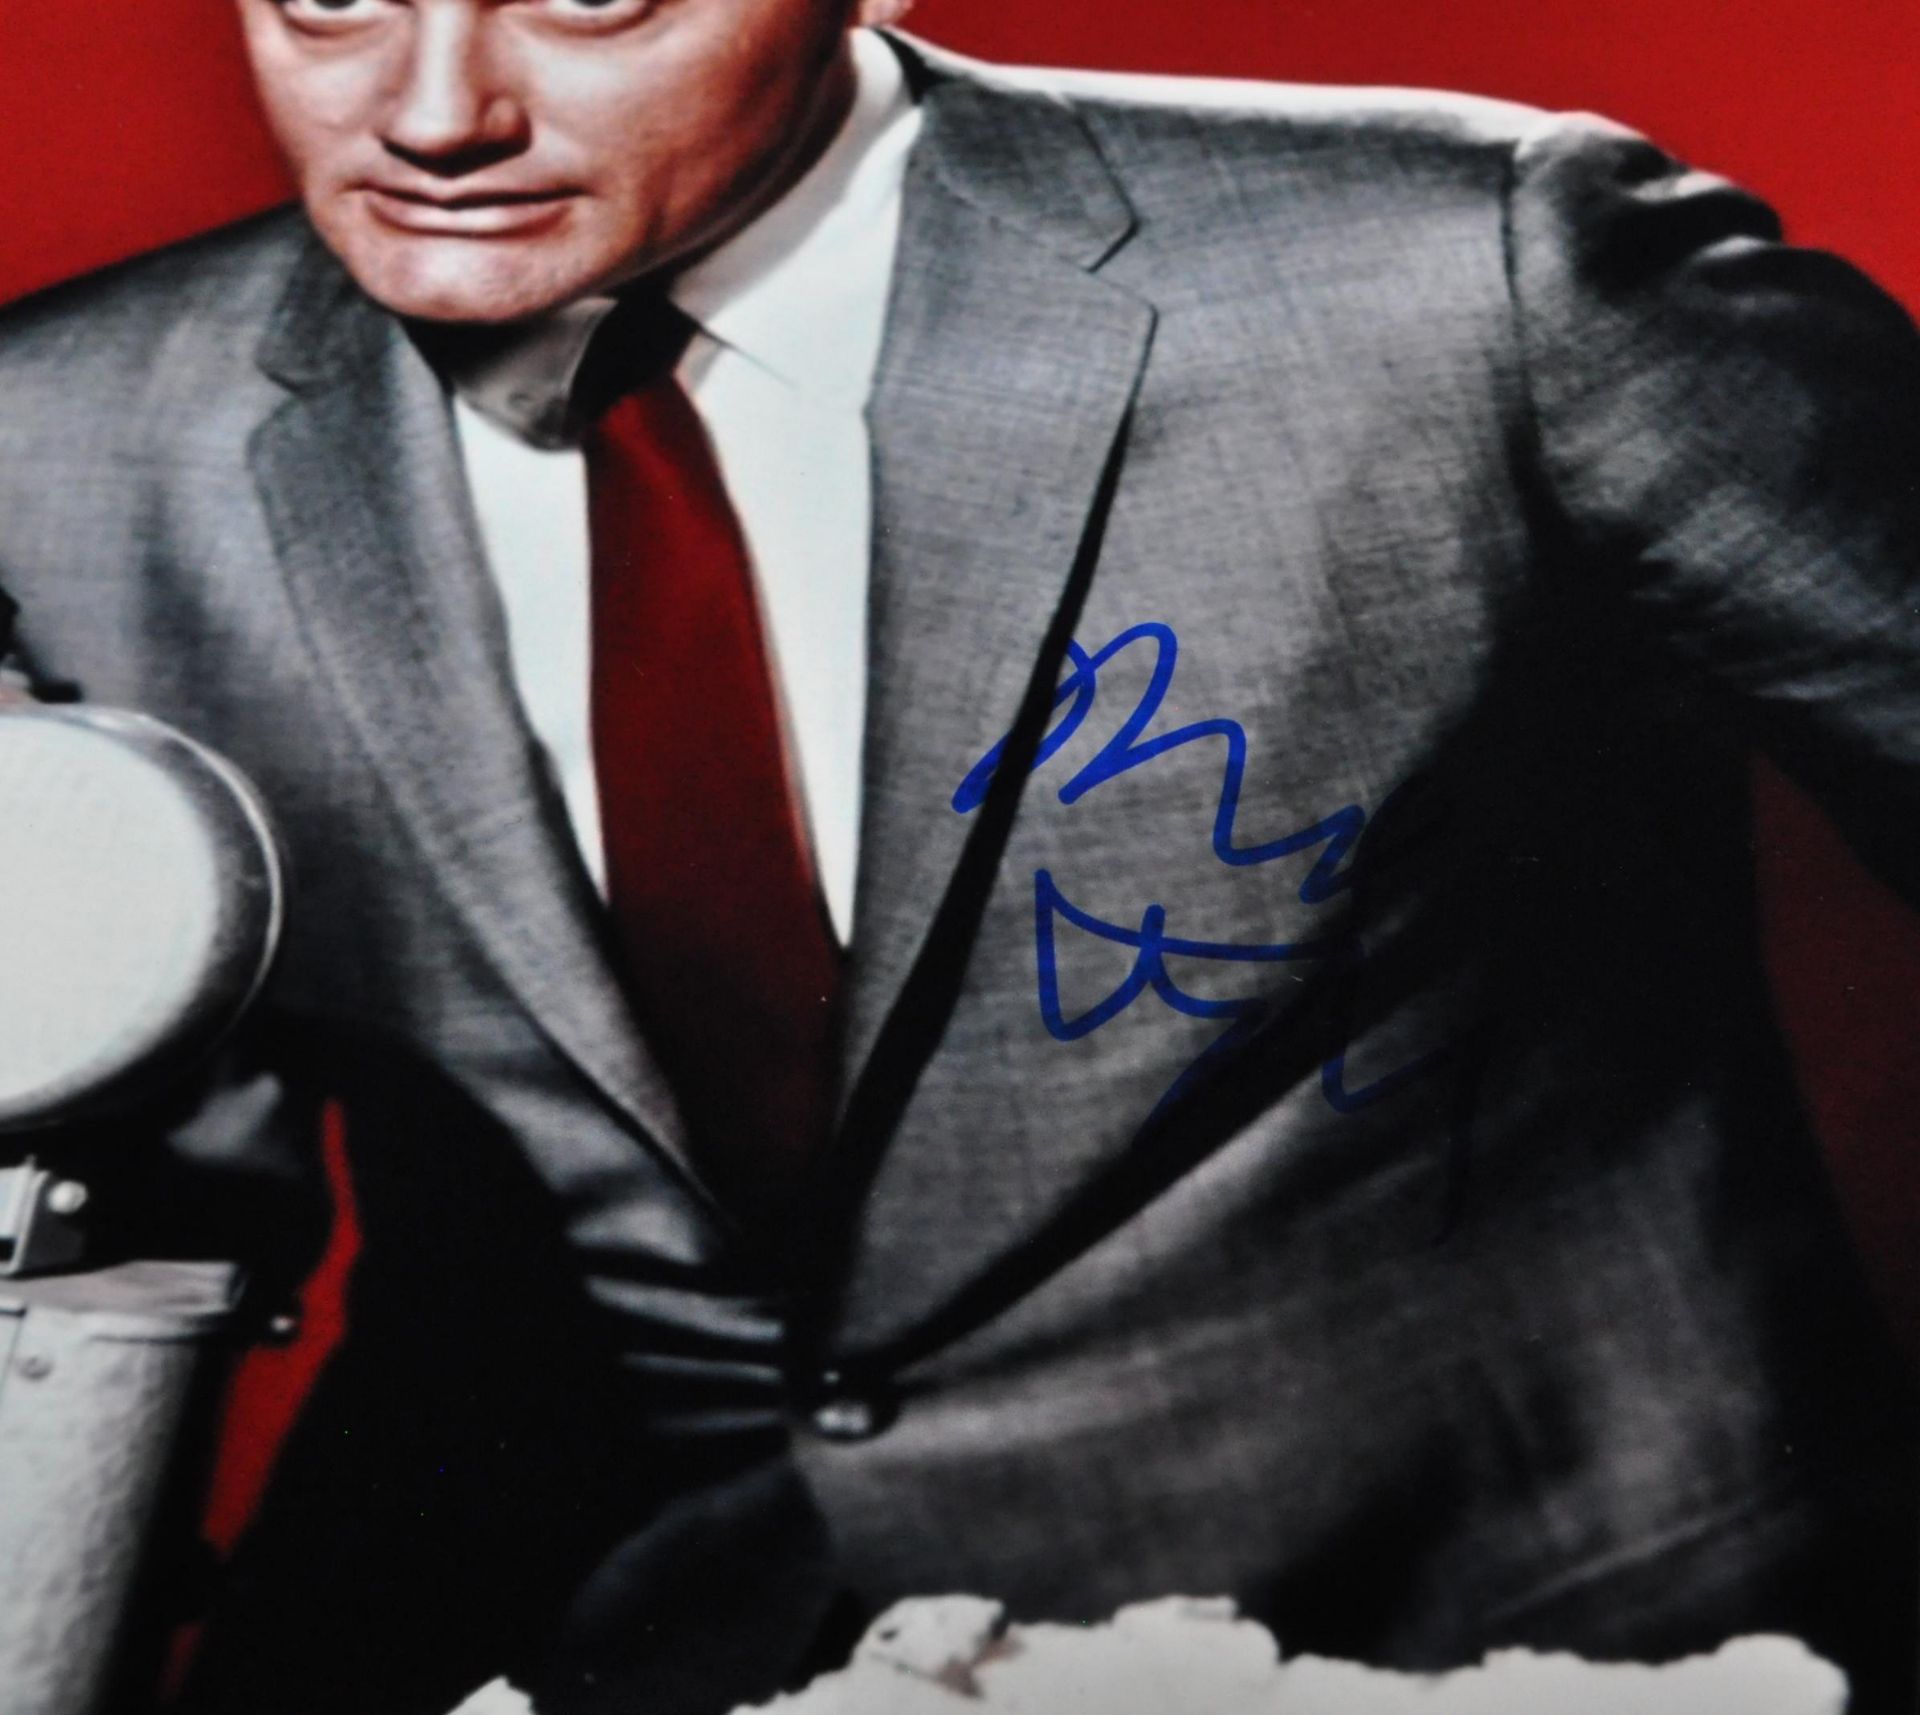 ROBERT VAUGHN - MAN FROM UNCLE - SIGNED PHOTO - AFTAL - Image 2 of 2